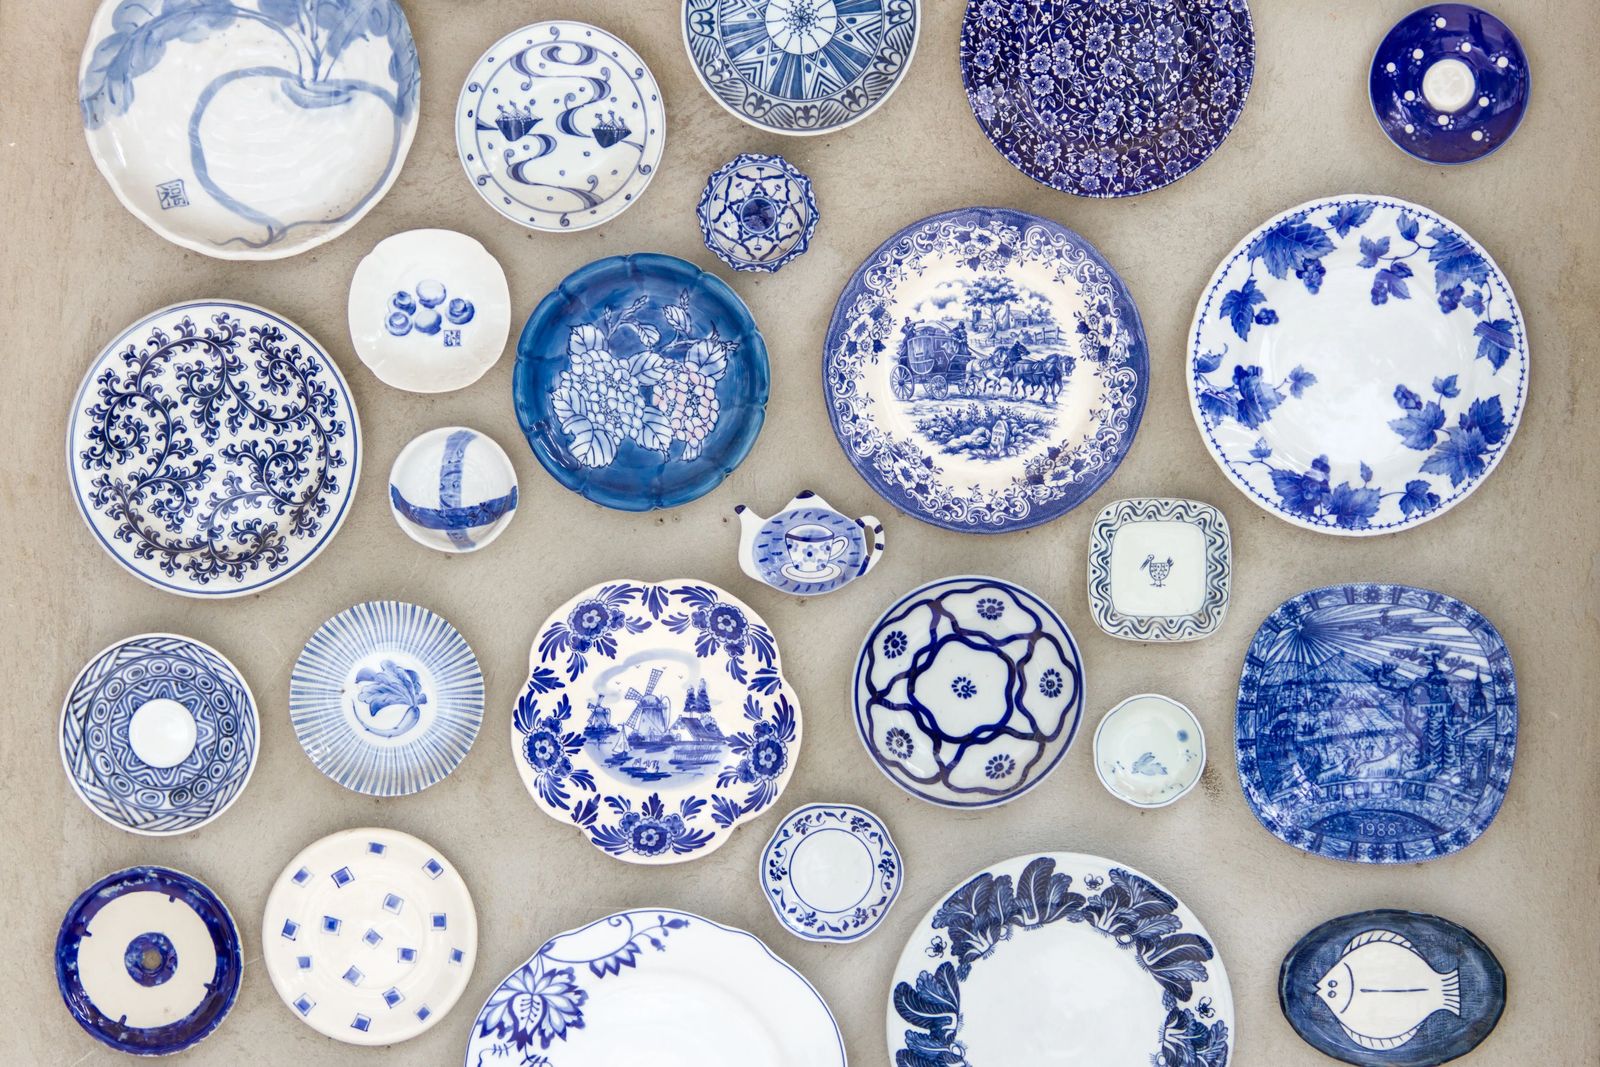 A Delft day trip from Amsterdam - Delft Blue Pottery